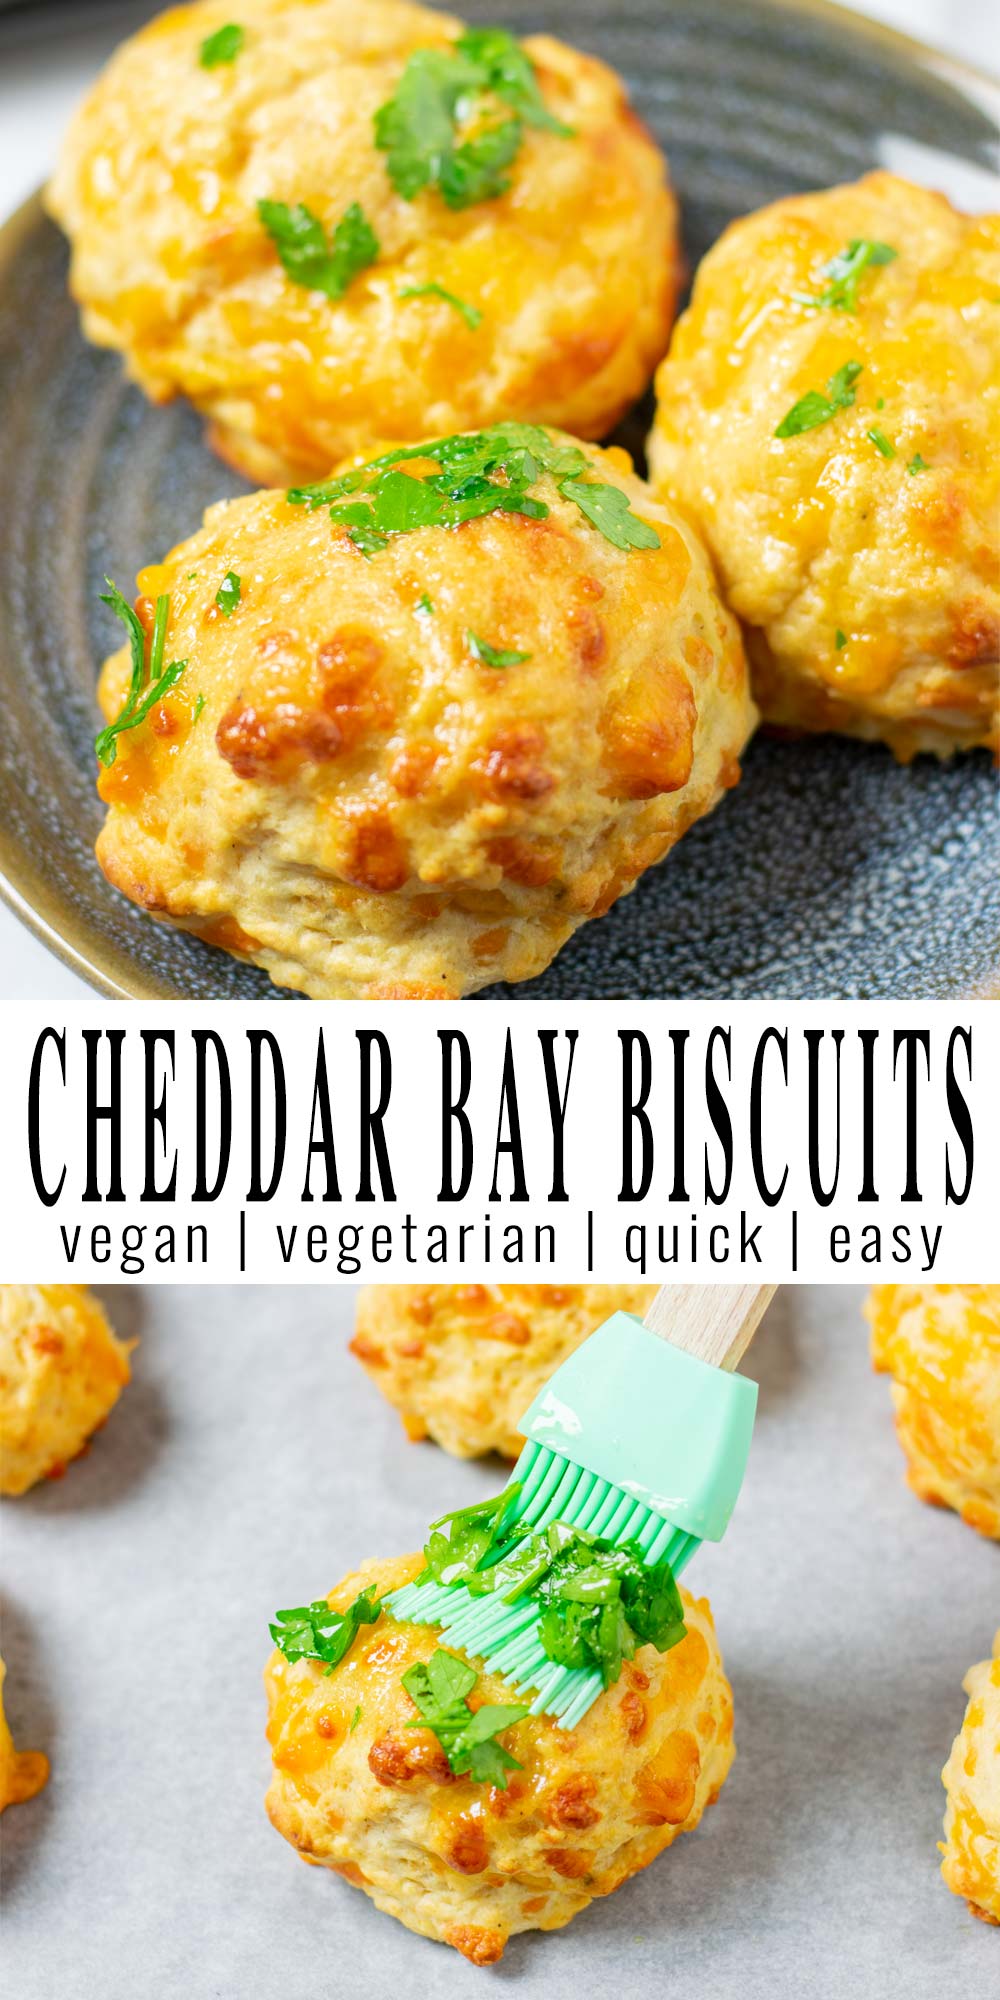 Collage of two pictures of the Cheddar Bay Biscuits with recipe title text.